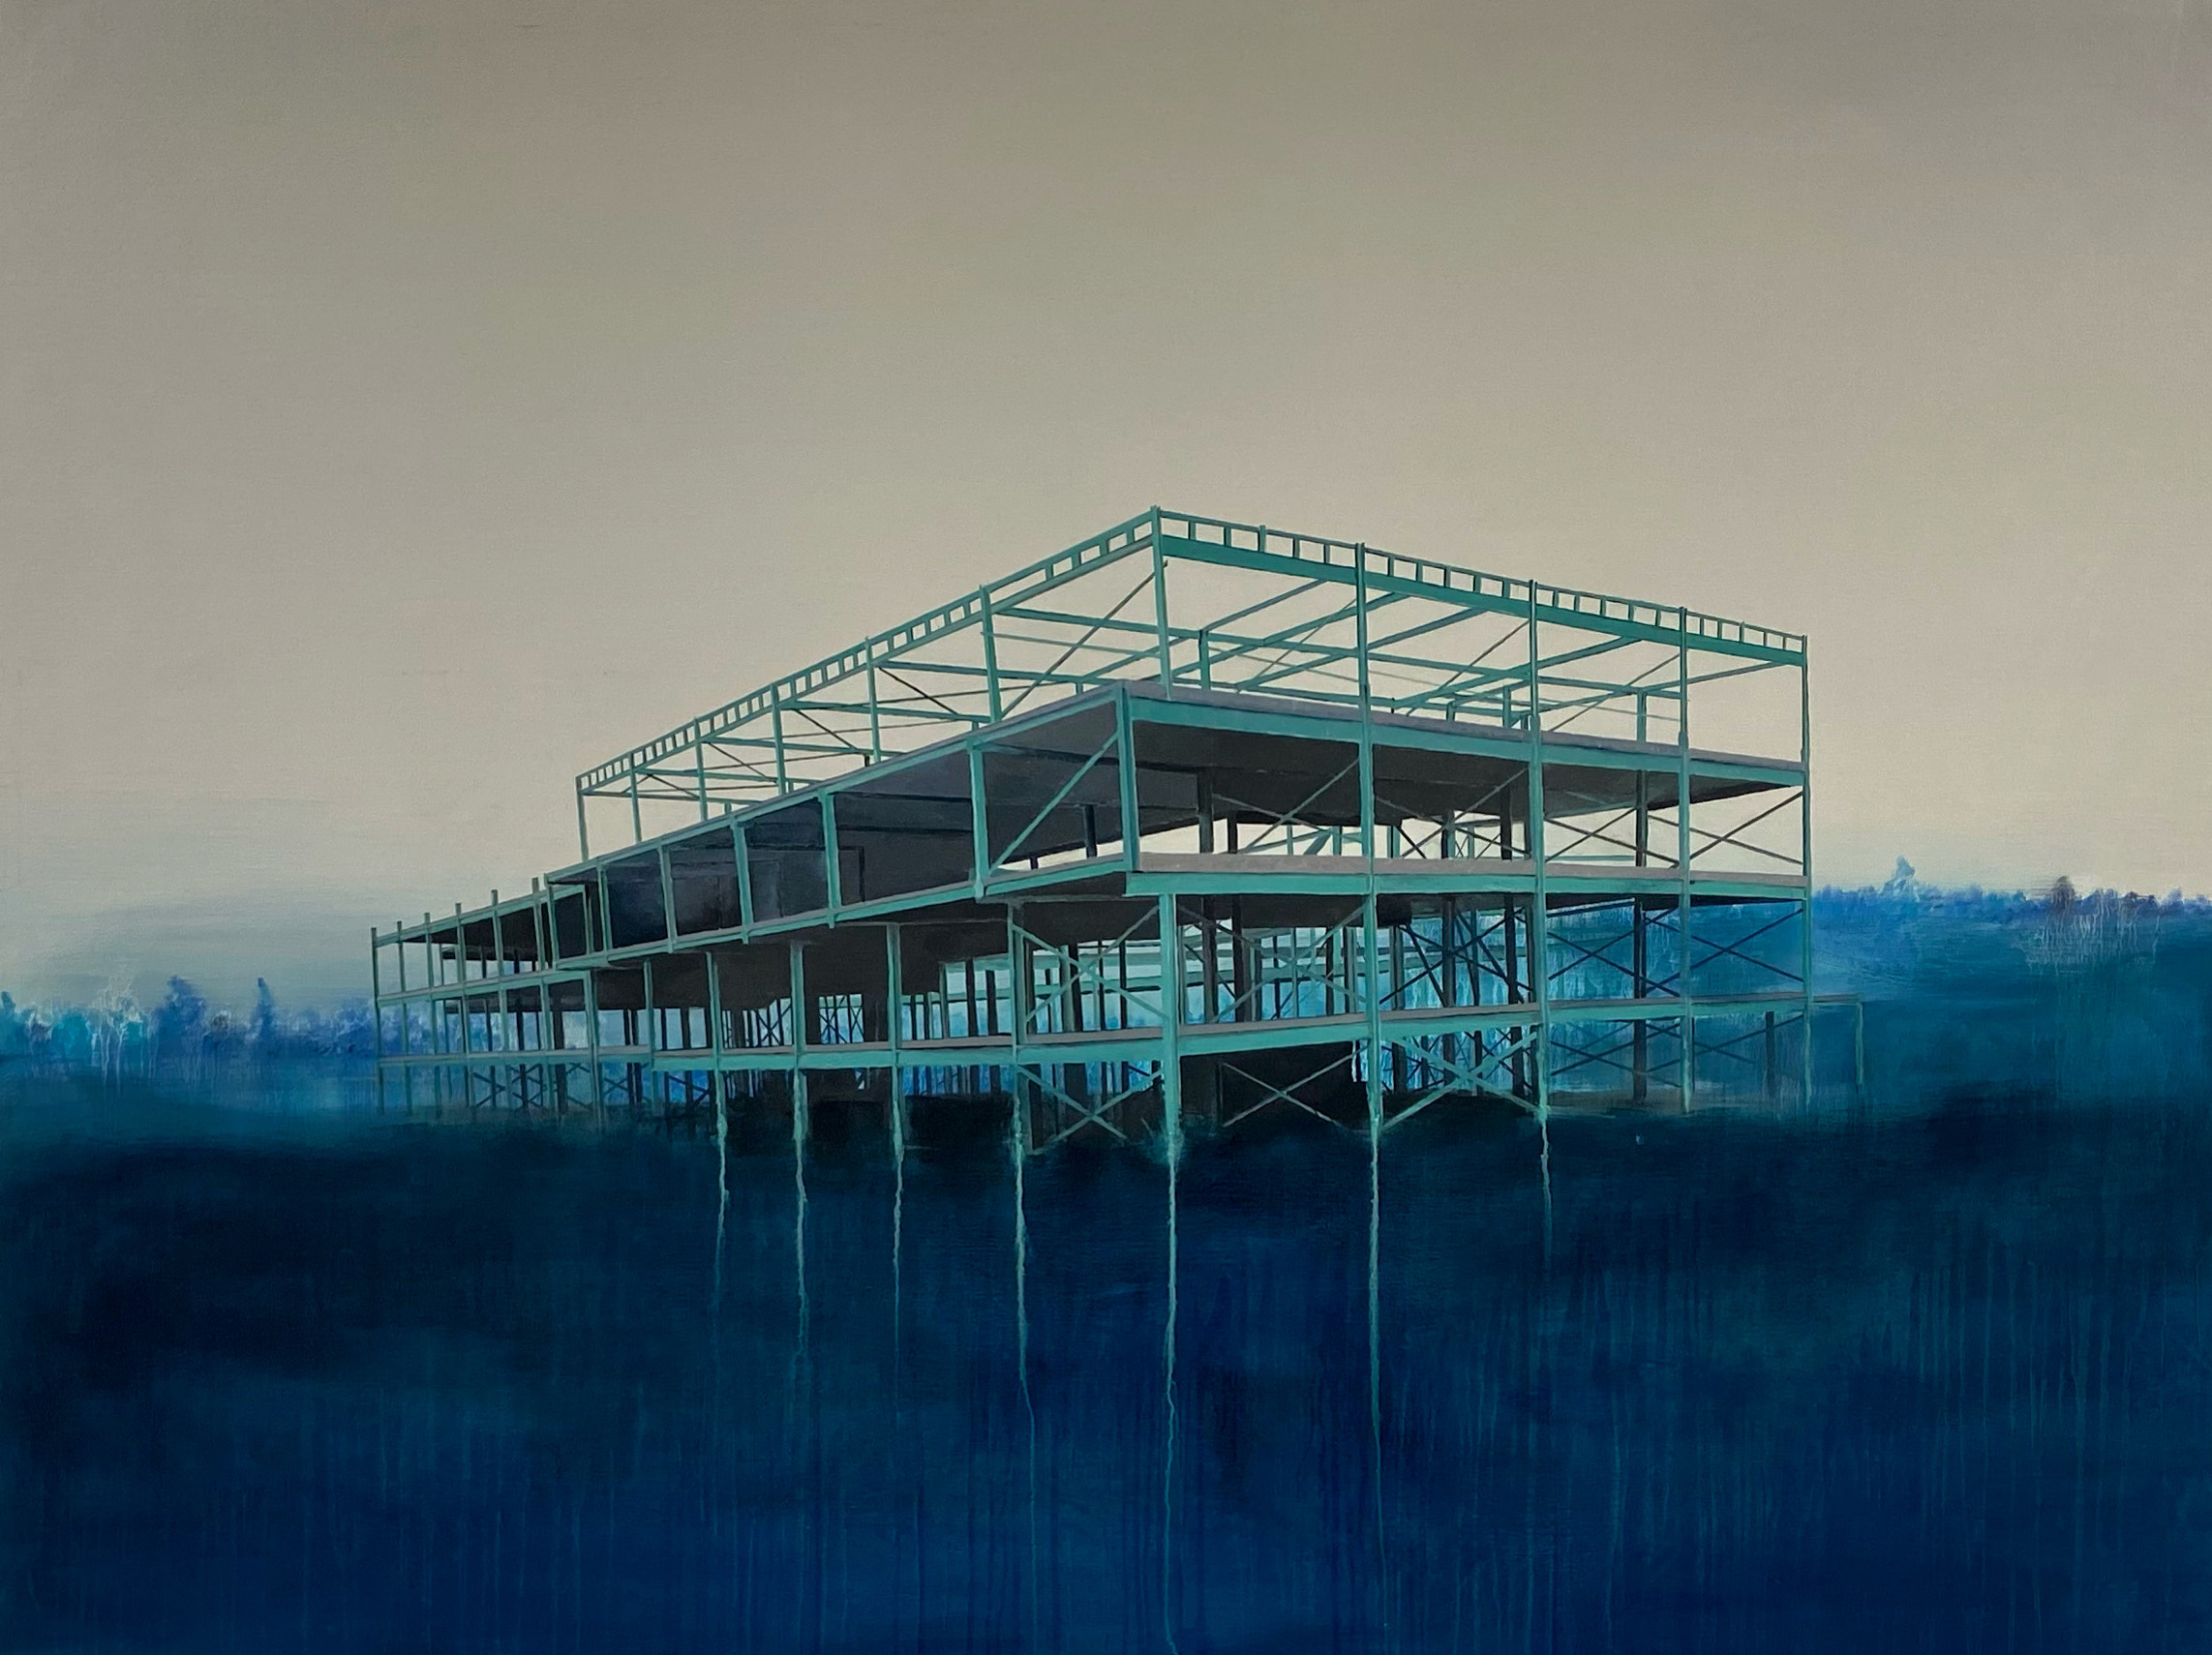 Pascal Ungerer, Earthbound, 2022, oil on canvas, 160 x 120cm | Pascal Ungerer: Speculative Artefacts | Saturday 16 September – Saturday 21 October 2023 | Uillinn: West Cork Arts Centre | Image: Pascal Ungerer, Earthbound, 2022, oil on canvas, 160 x 120cm | corner-on view of the steel-girder skeleton of a four-storey building; evidence too of concrete cross-slabs; the setting is ambiguous – the building appears to be in the water of a lake in a wooded region; the colour scheme is mostly intense blue, with muted turquoise for the girders and a brownish-grey sky 